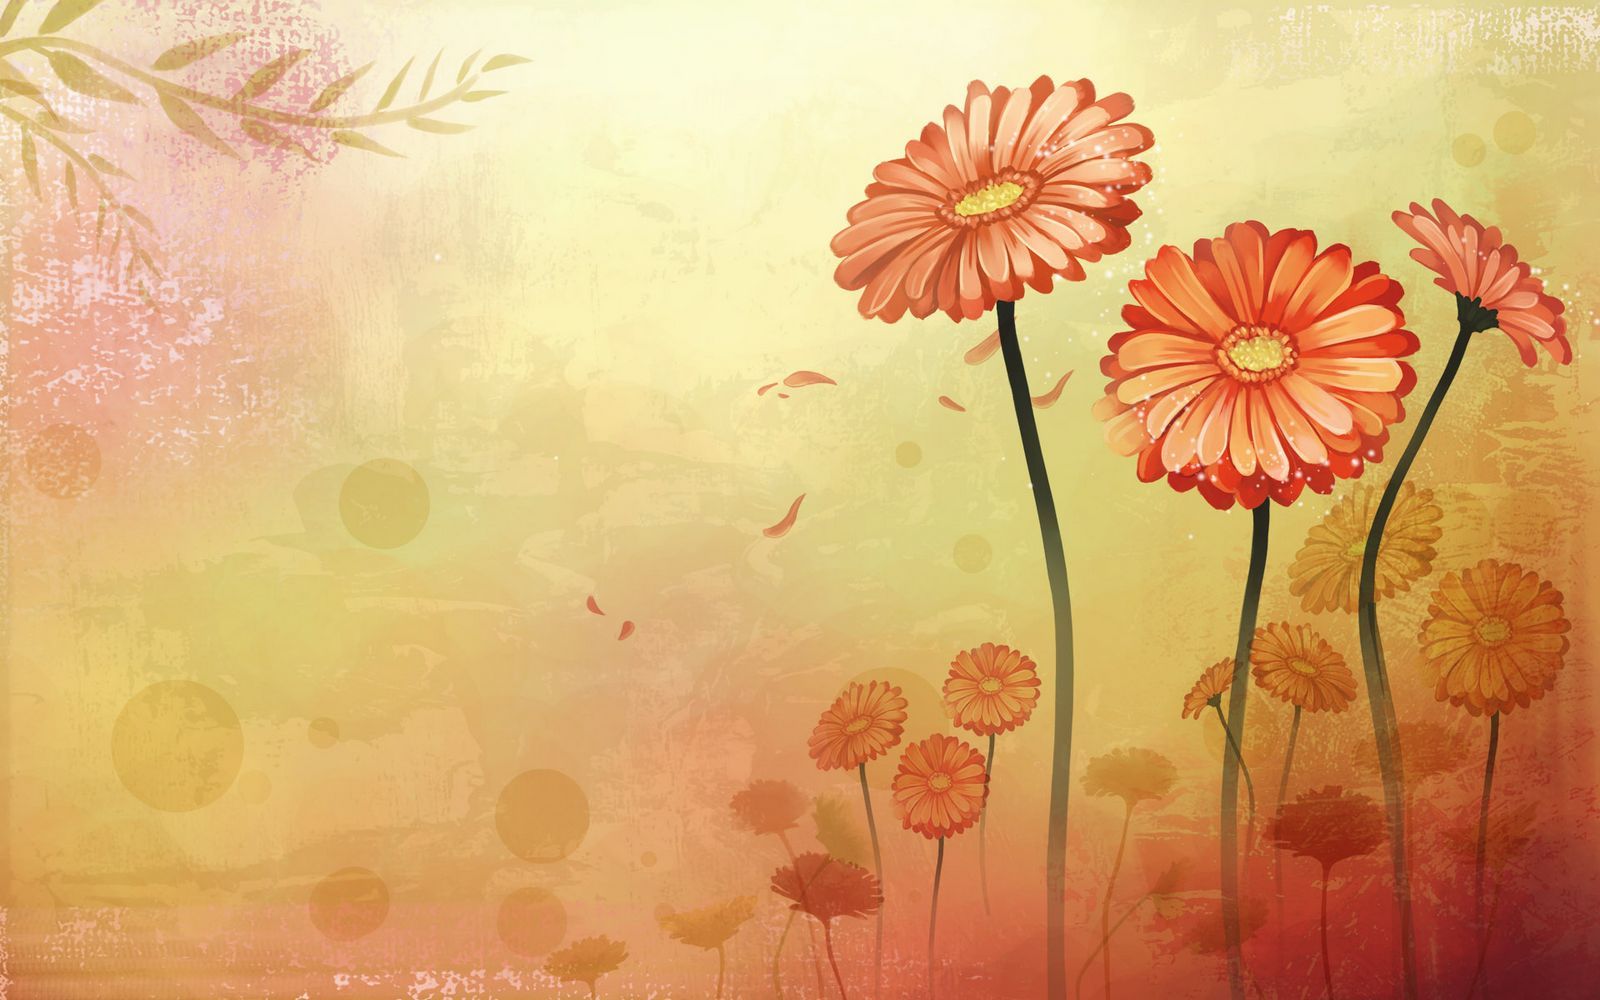 Beautifully Illustrated Vector Flower Backgrounds